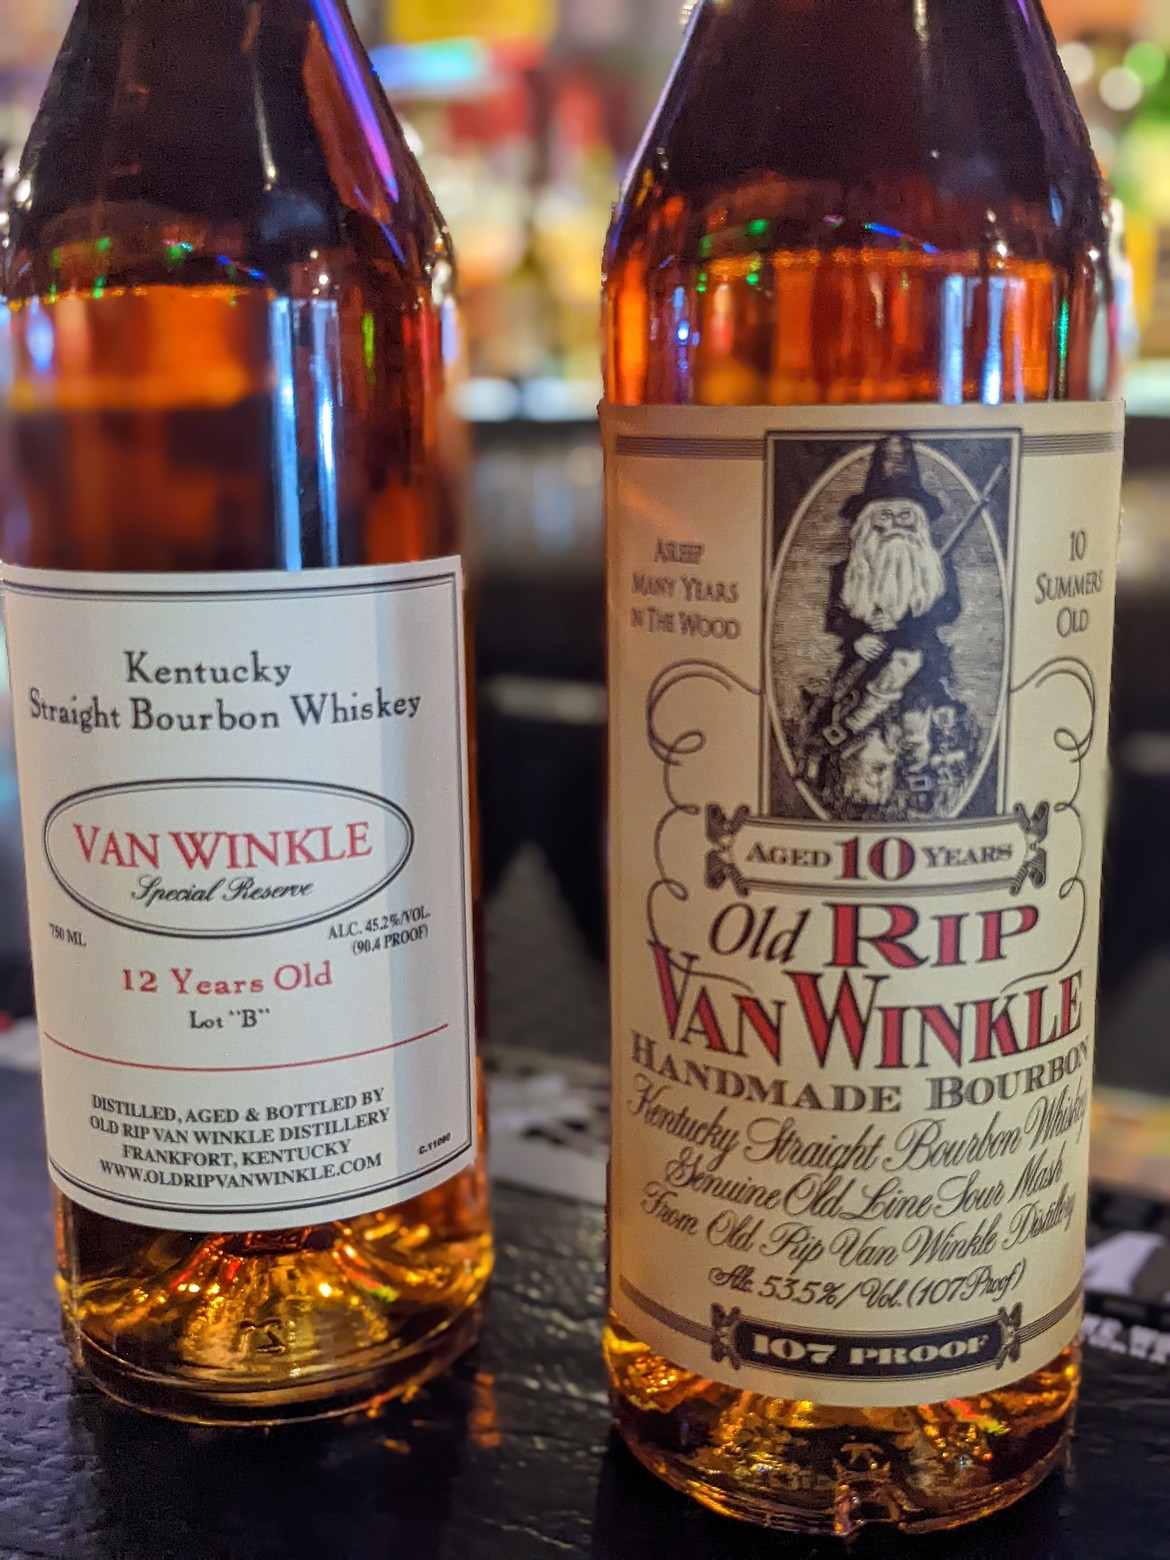 The Van Winkle Special Reserve and Old Rip Van Winkle 10 Year bottles at the Metals Bar. While the bottles technically retail for $79.99 and $69.99, respectively, the rarity and quality of the bourbon increases their value tremendously once they leave the distillery in Kentucky.